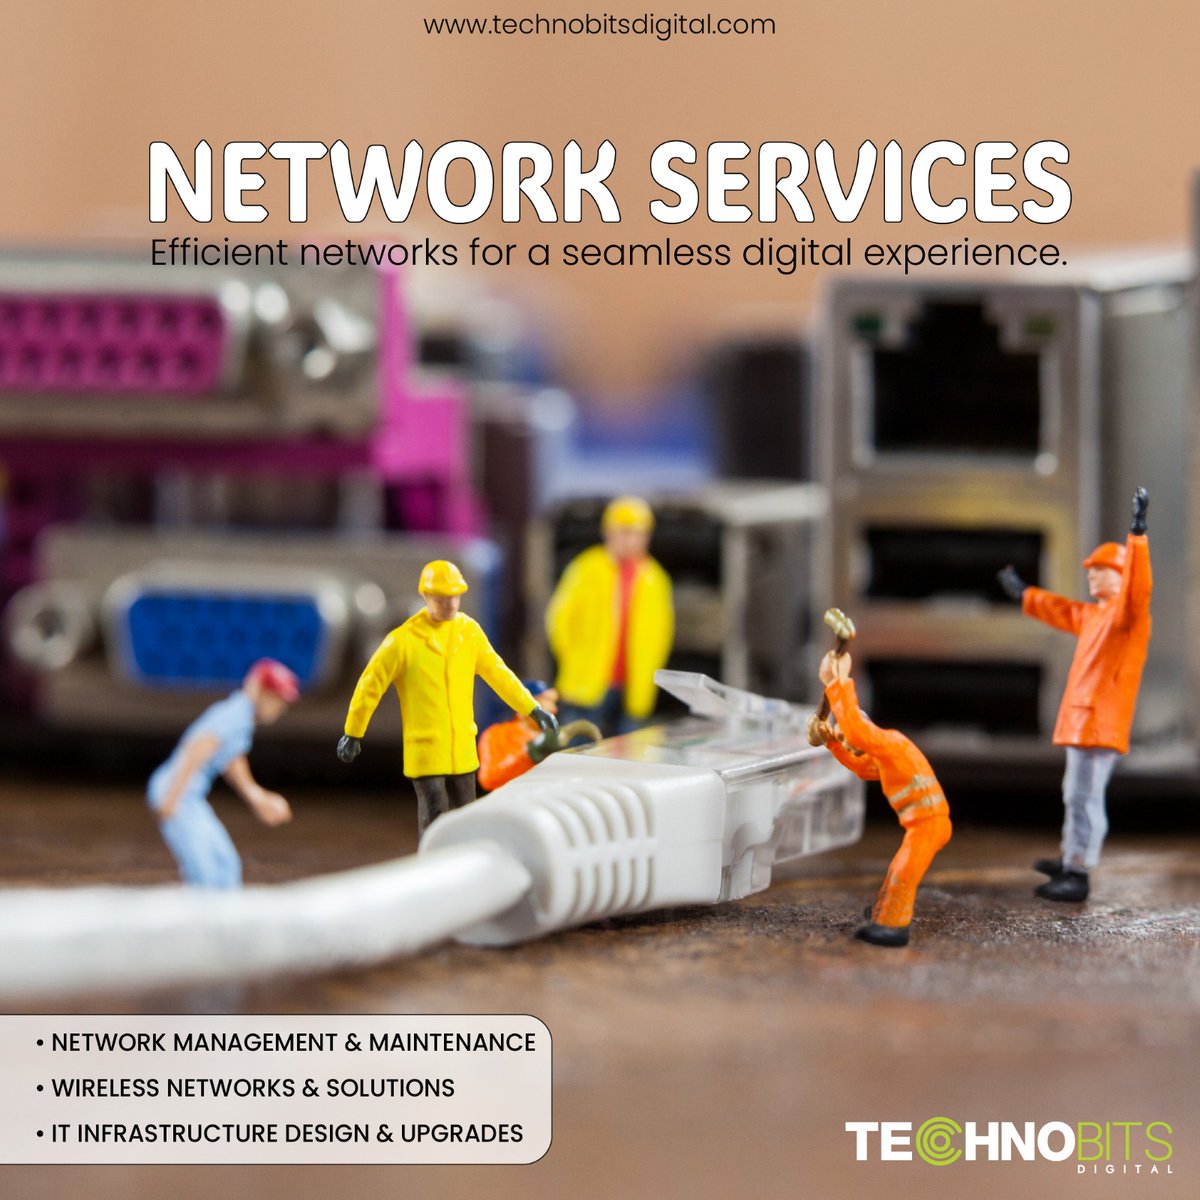 Network services are essential for businesses of all sizes. They allow businesses to connect with their employees, customers, and partners, and to access the resources they need to operate.
.
.
#TechnobitsDigital #networkmanagement #NetworkServices #wirlessnetwork #infrastructure